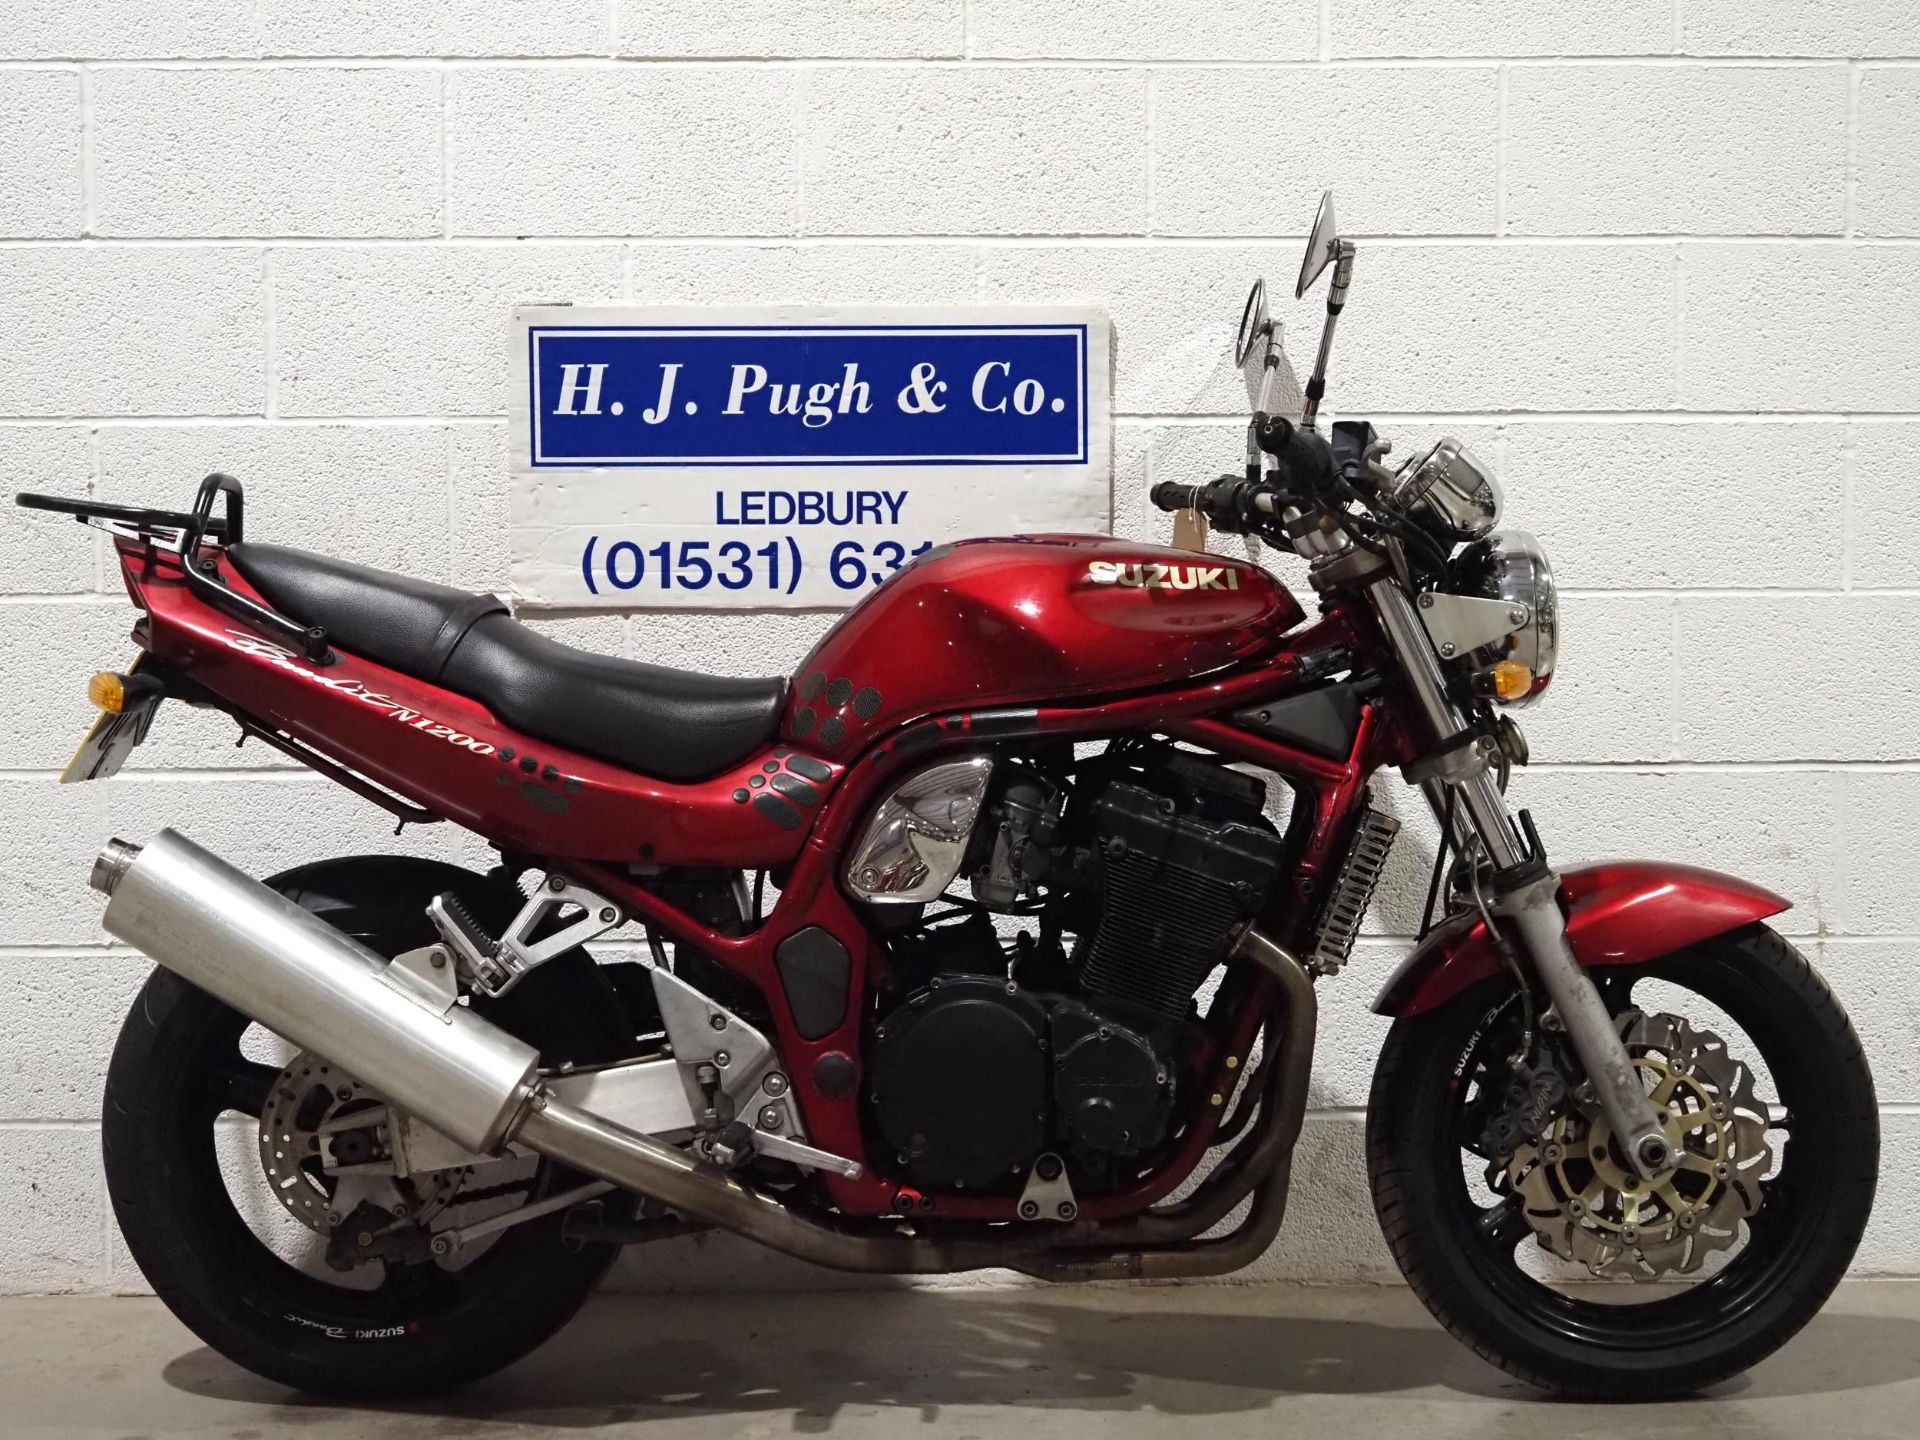 Suzuki GSF1200 Bandit motorcycle. 2000. 1157cc. Runs and rides. MOT until 01.02.05. Comes with MOT